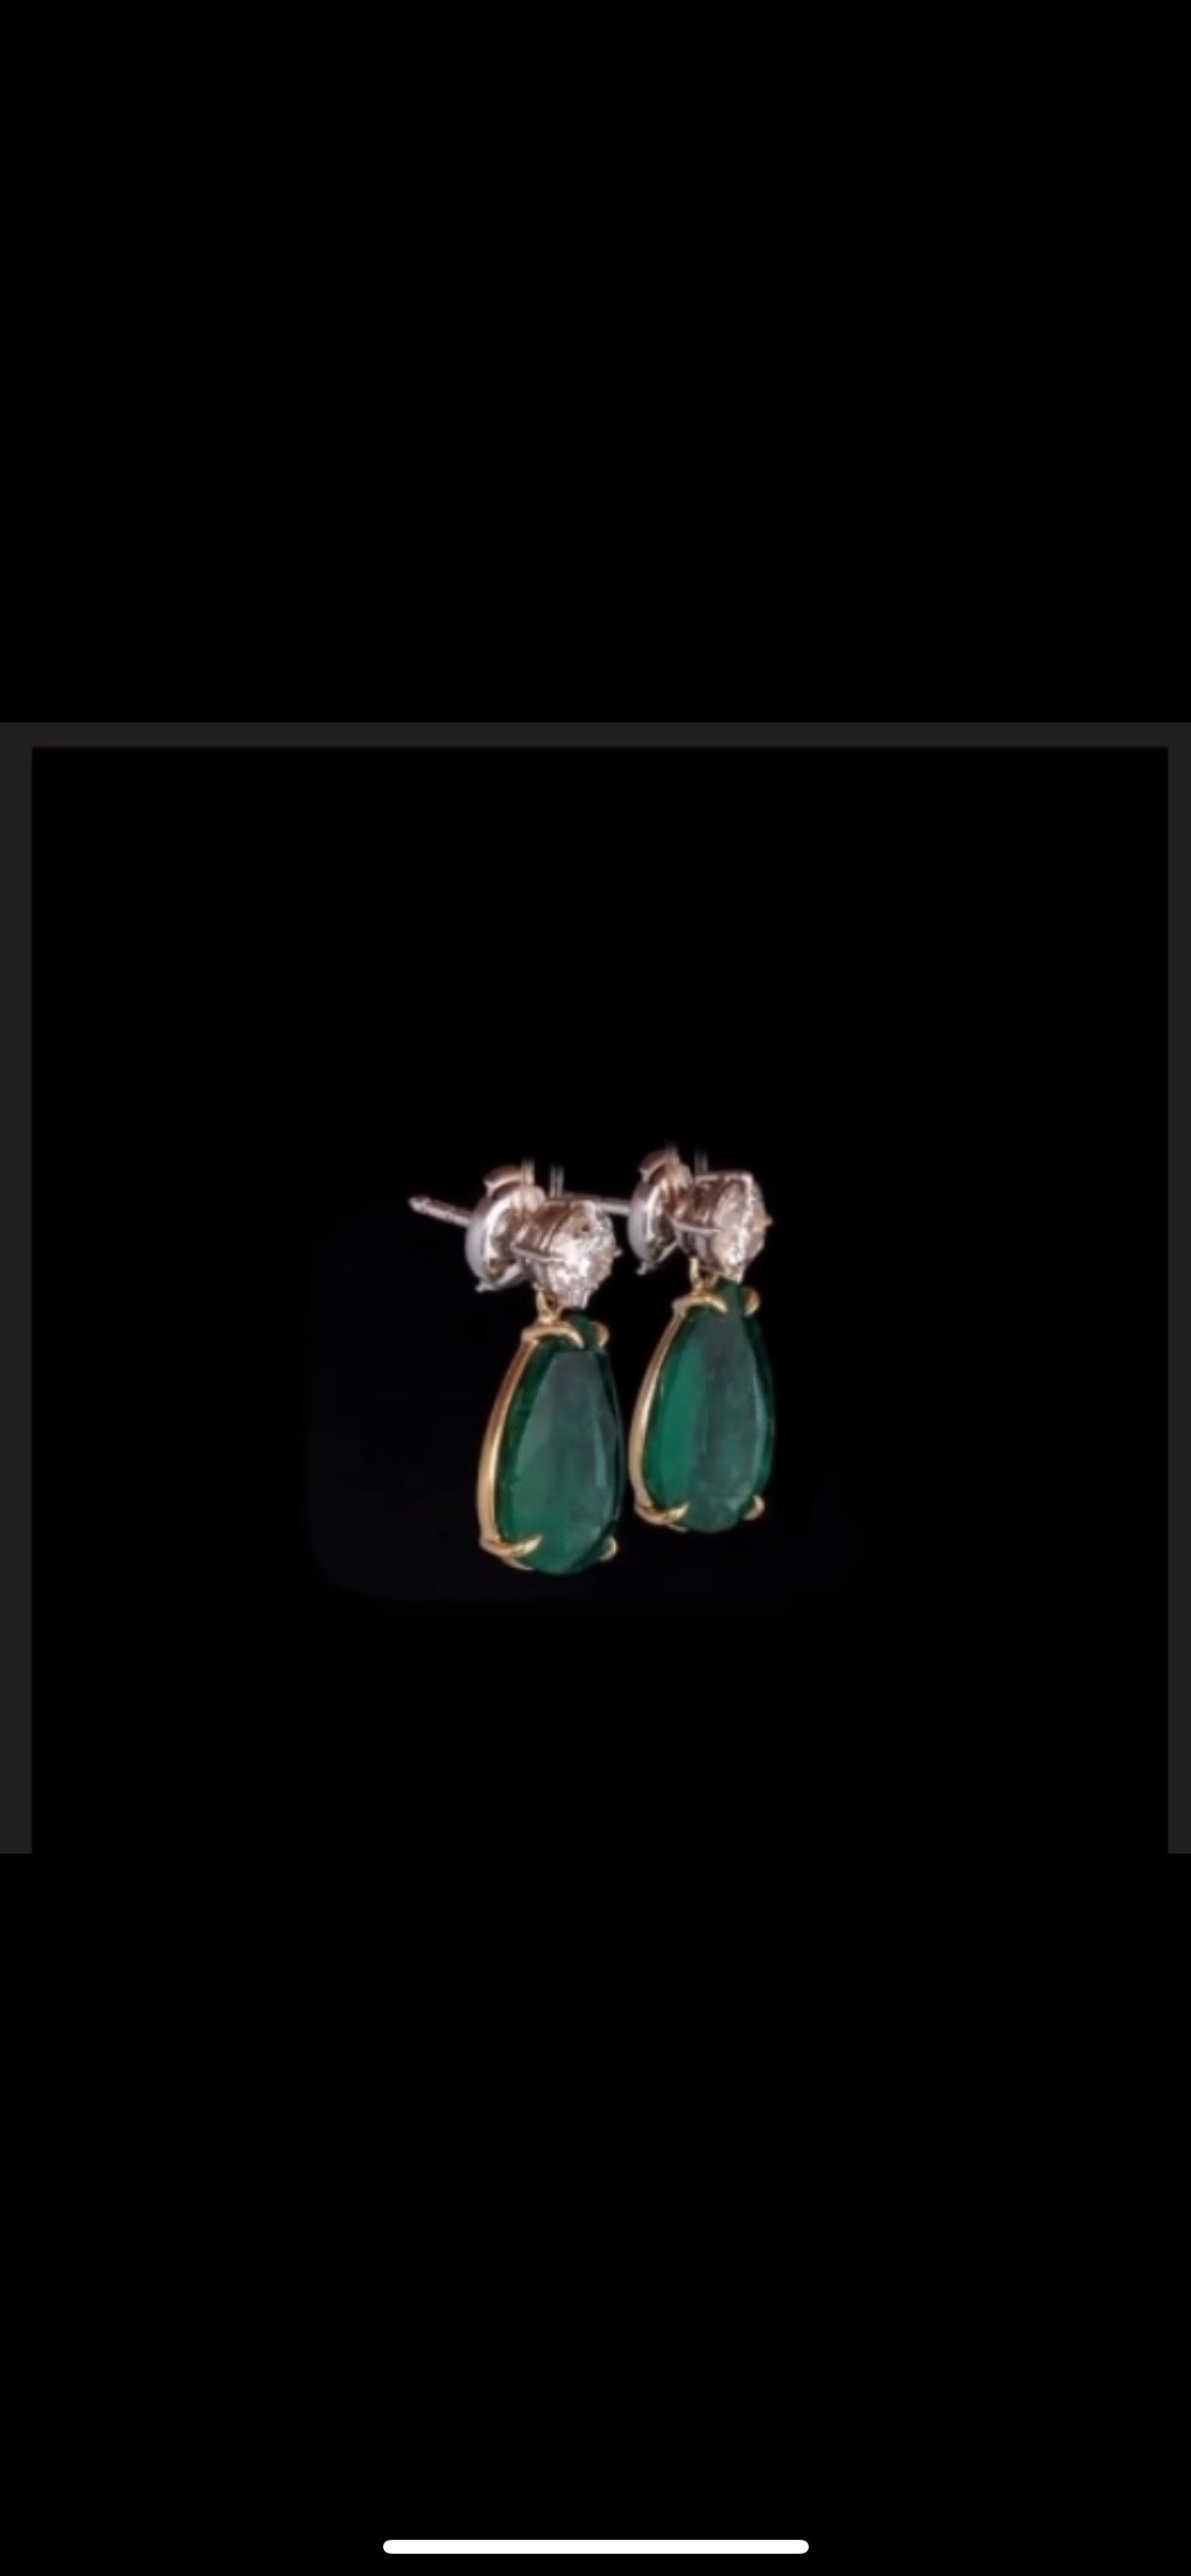 14k White Gold Pear Shape Emerald Earring With Diamond